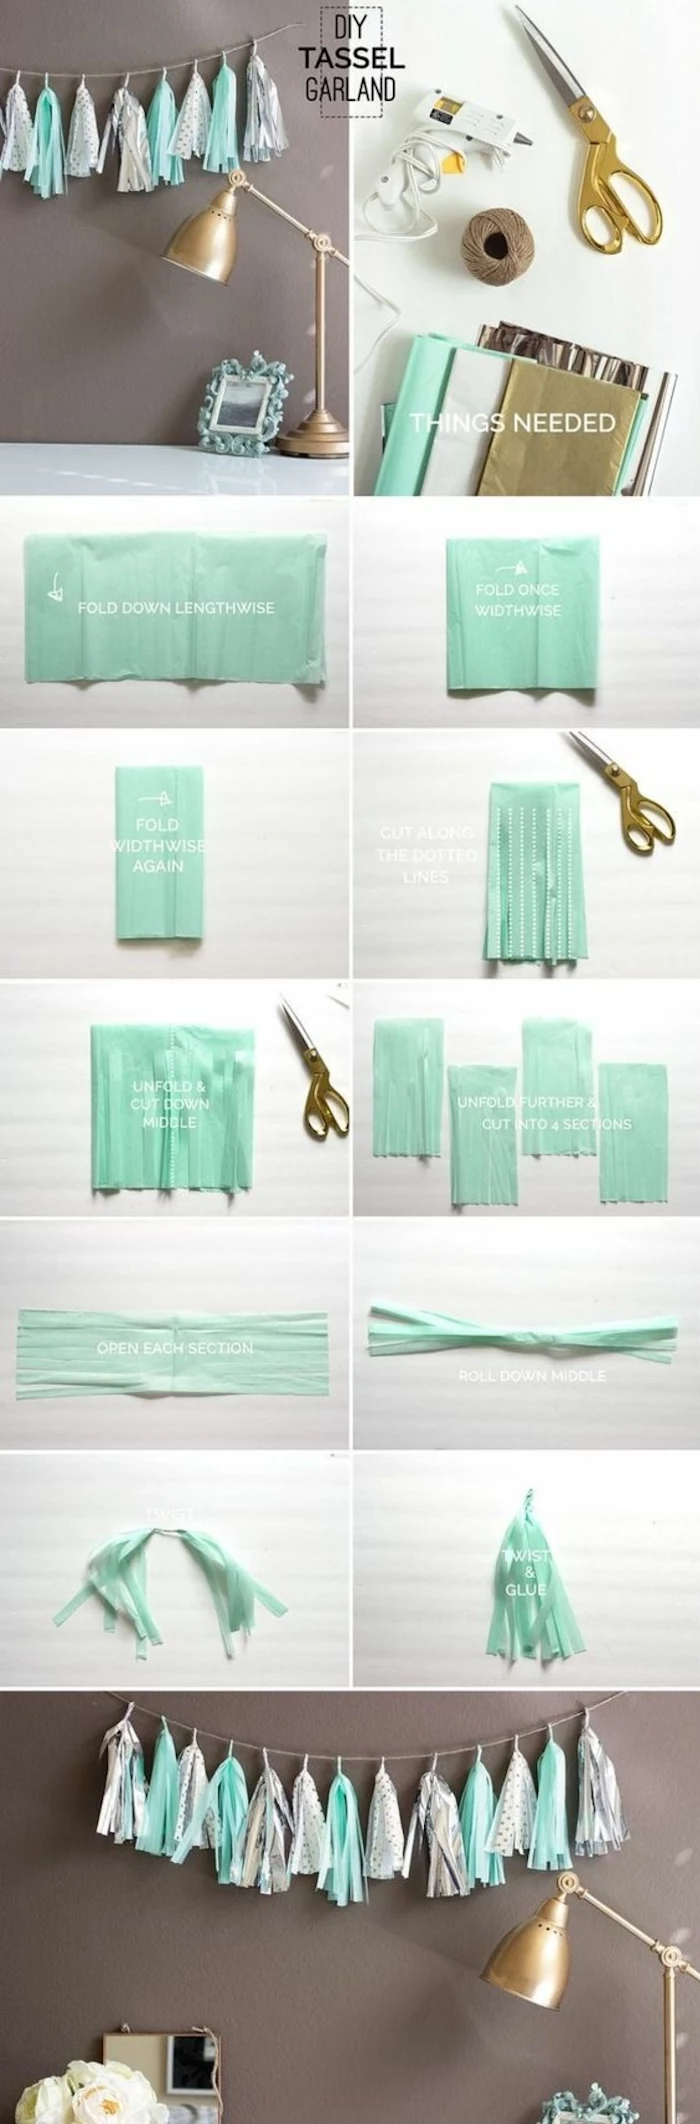 tassel garland, cool diy projects, step by step, diy tutorial, turquoise and grey paper